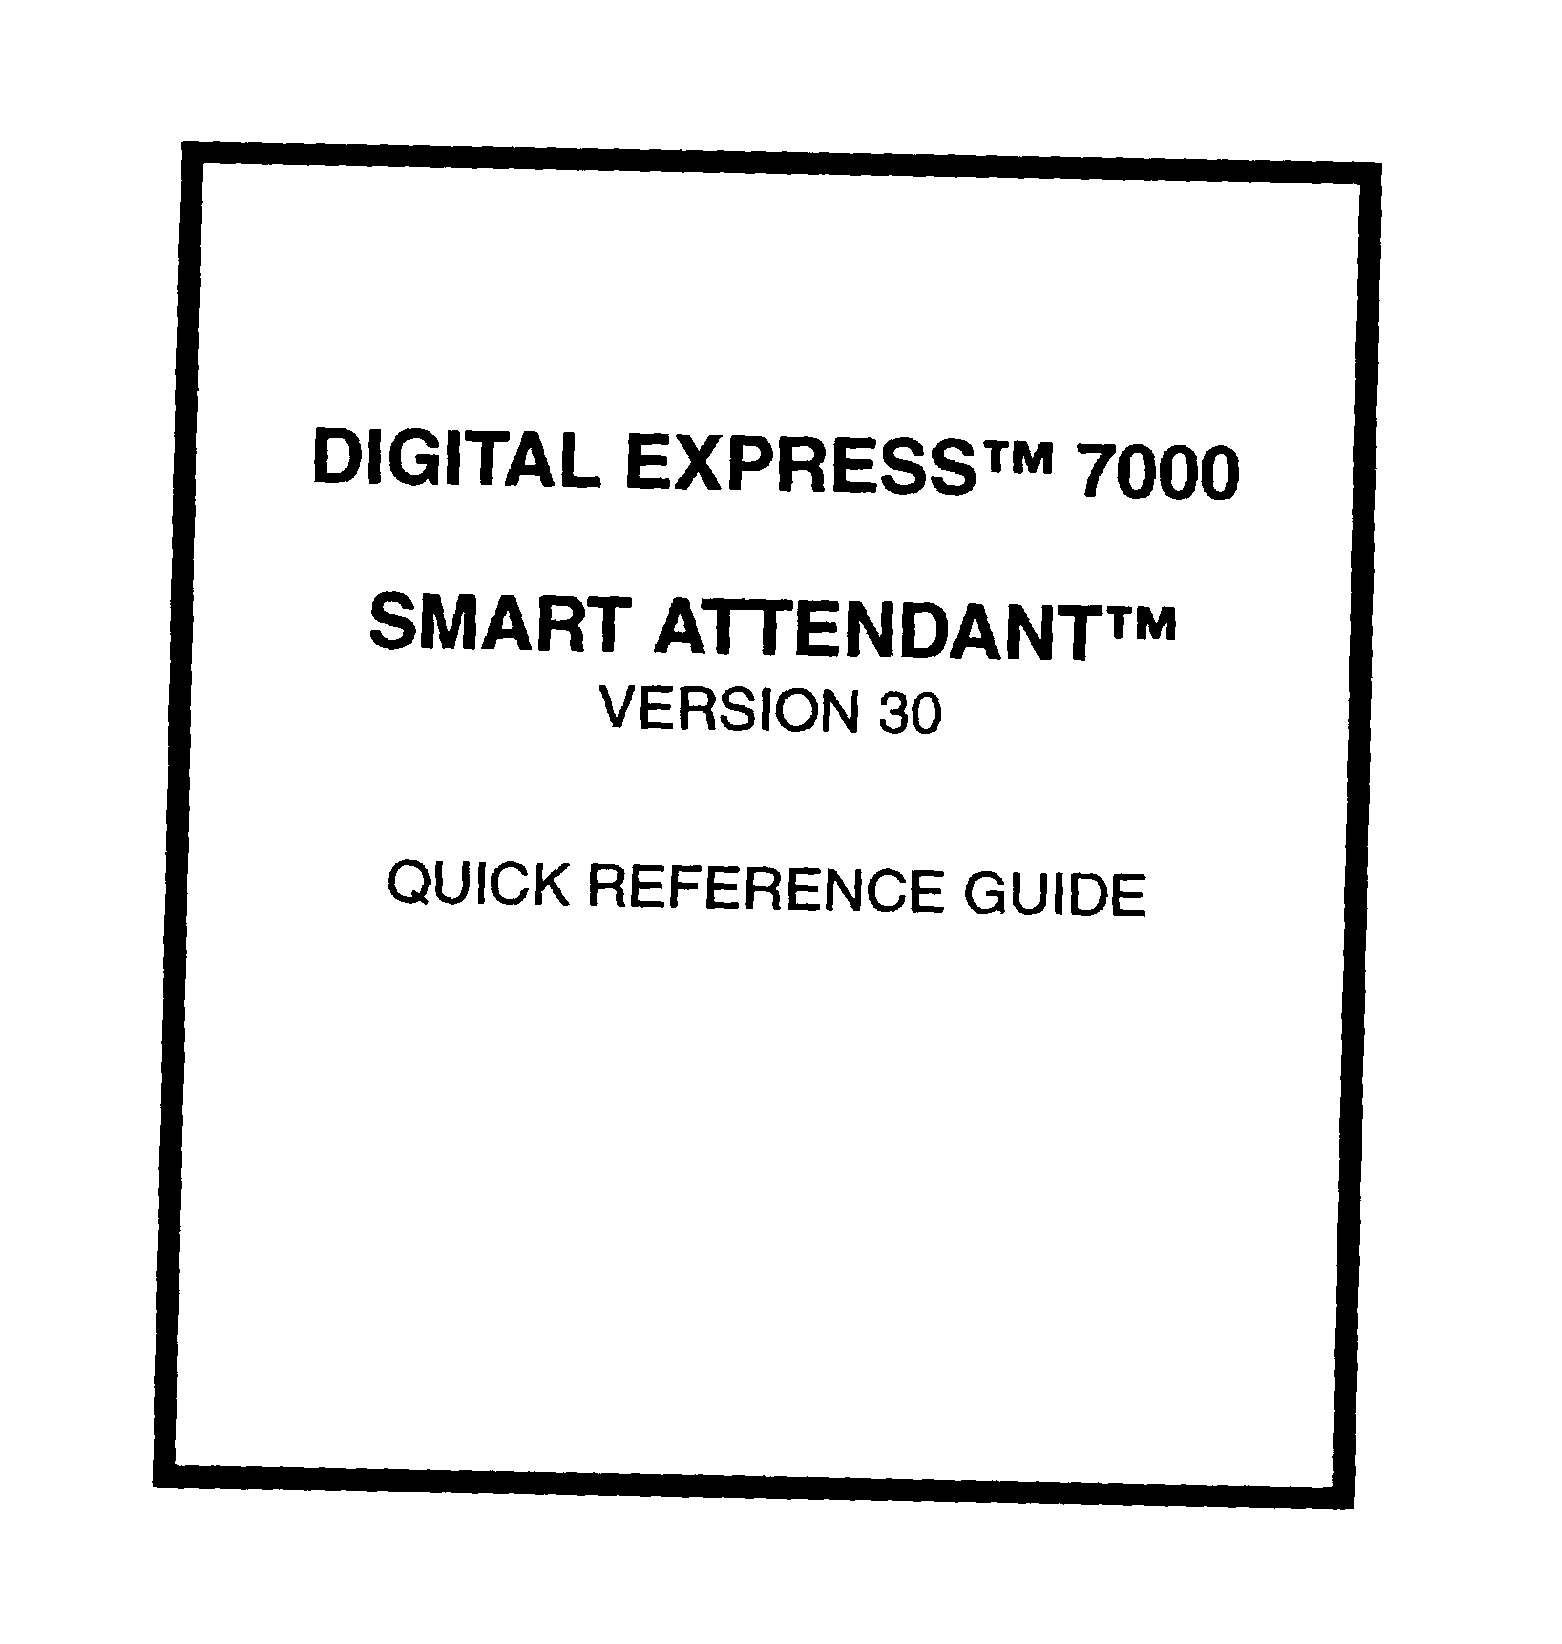  DIGITAL EXPRESS 7000 SMART ATTENDANT VERSION 30 QUICK REFERENCE GUIDE